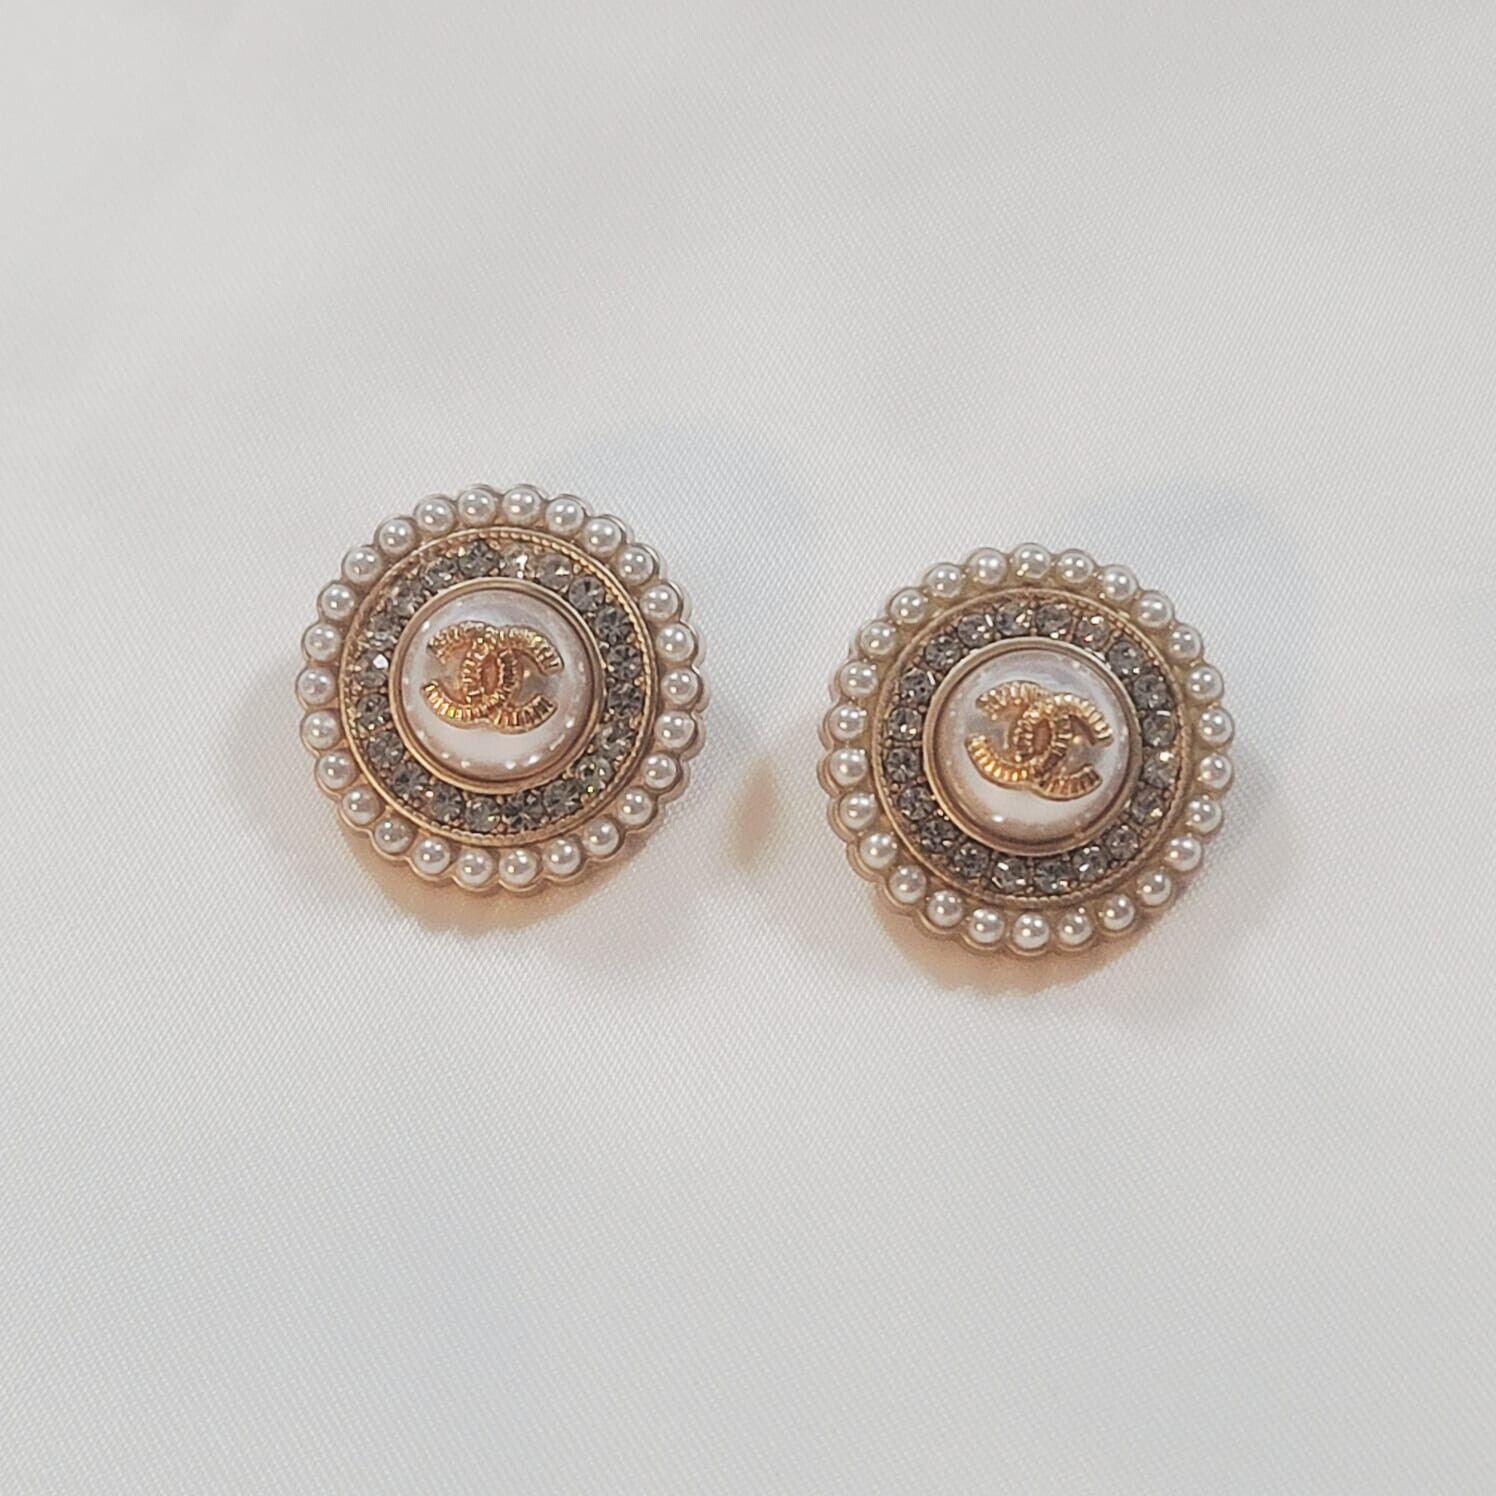 2pc Set 22mm Chanel Buttons